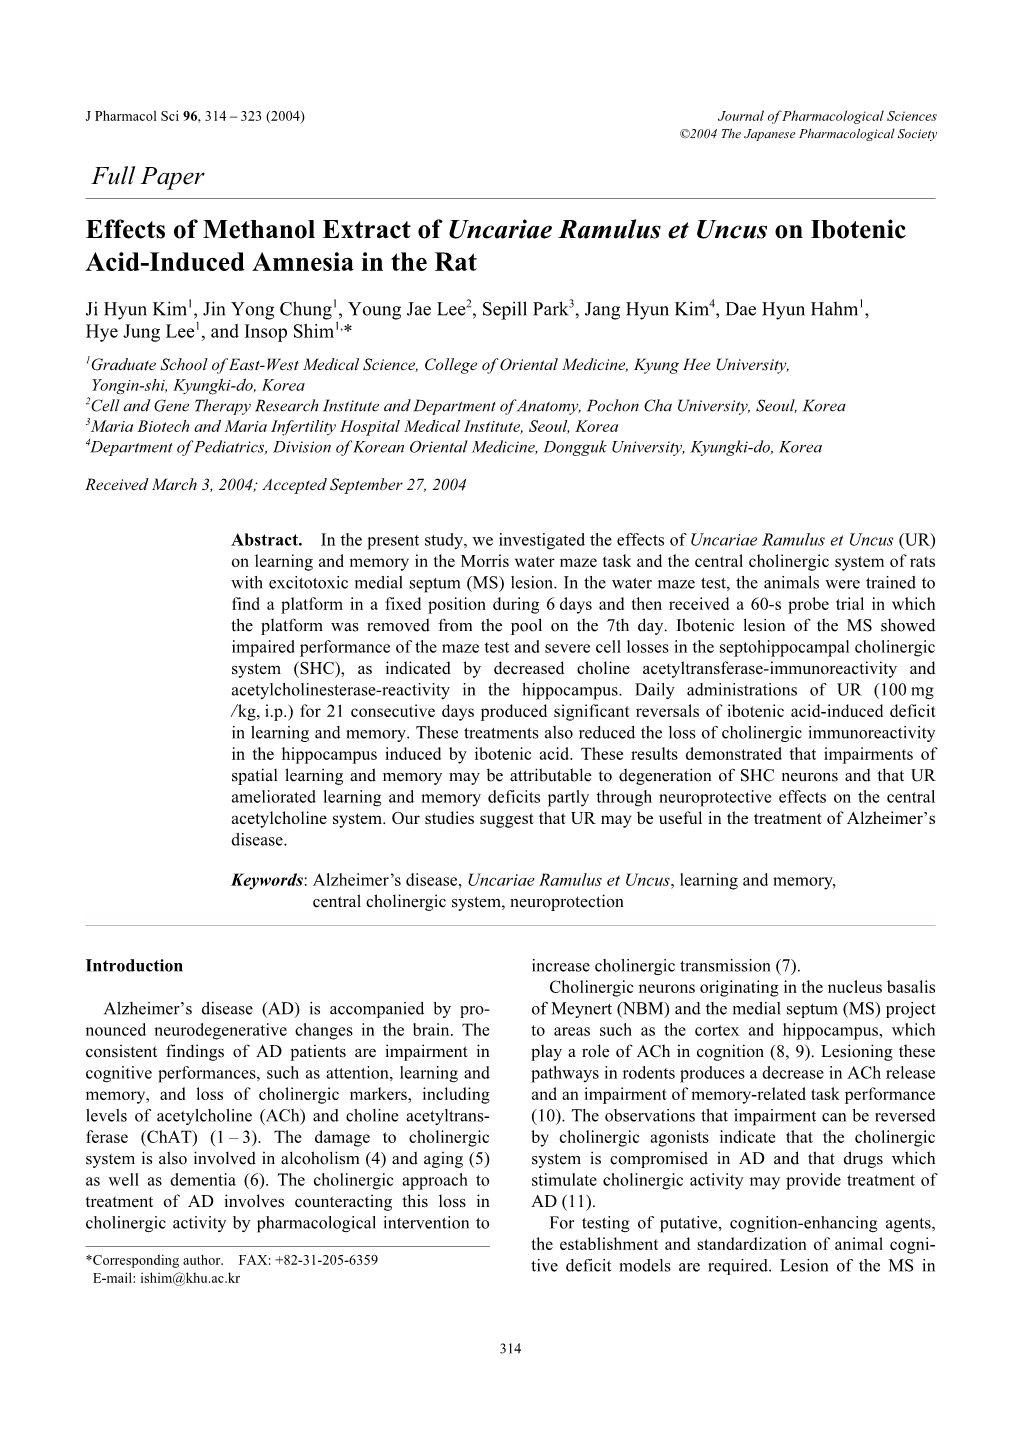 Effects of Methanol Extract of Uncariae Ramulus Et Uncus on Ibotenic Acid-Induced Amnesia in the Rat